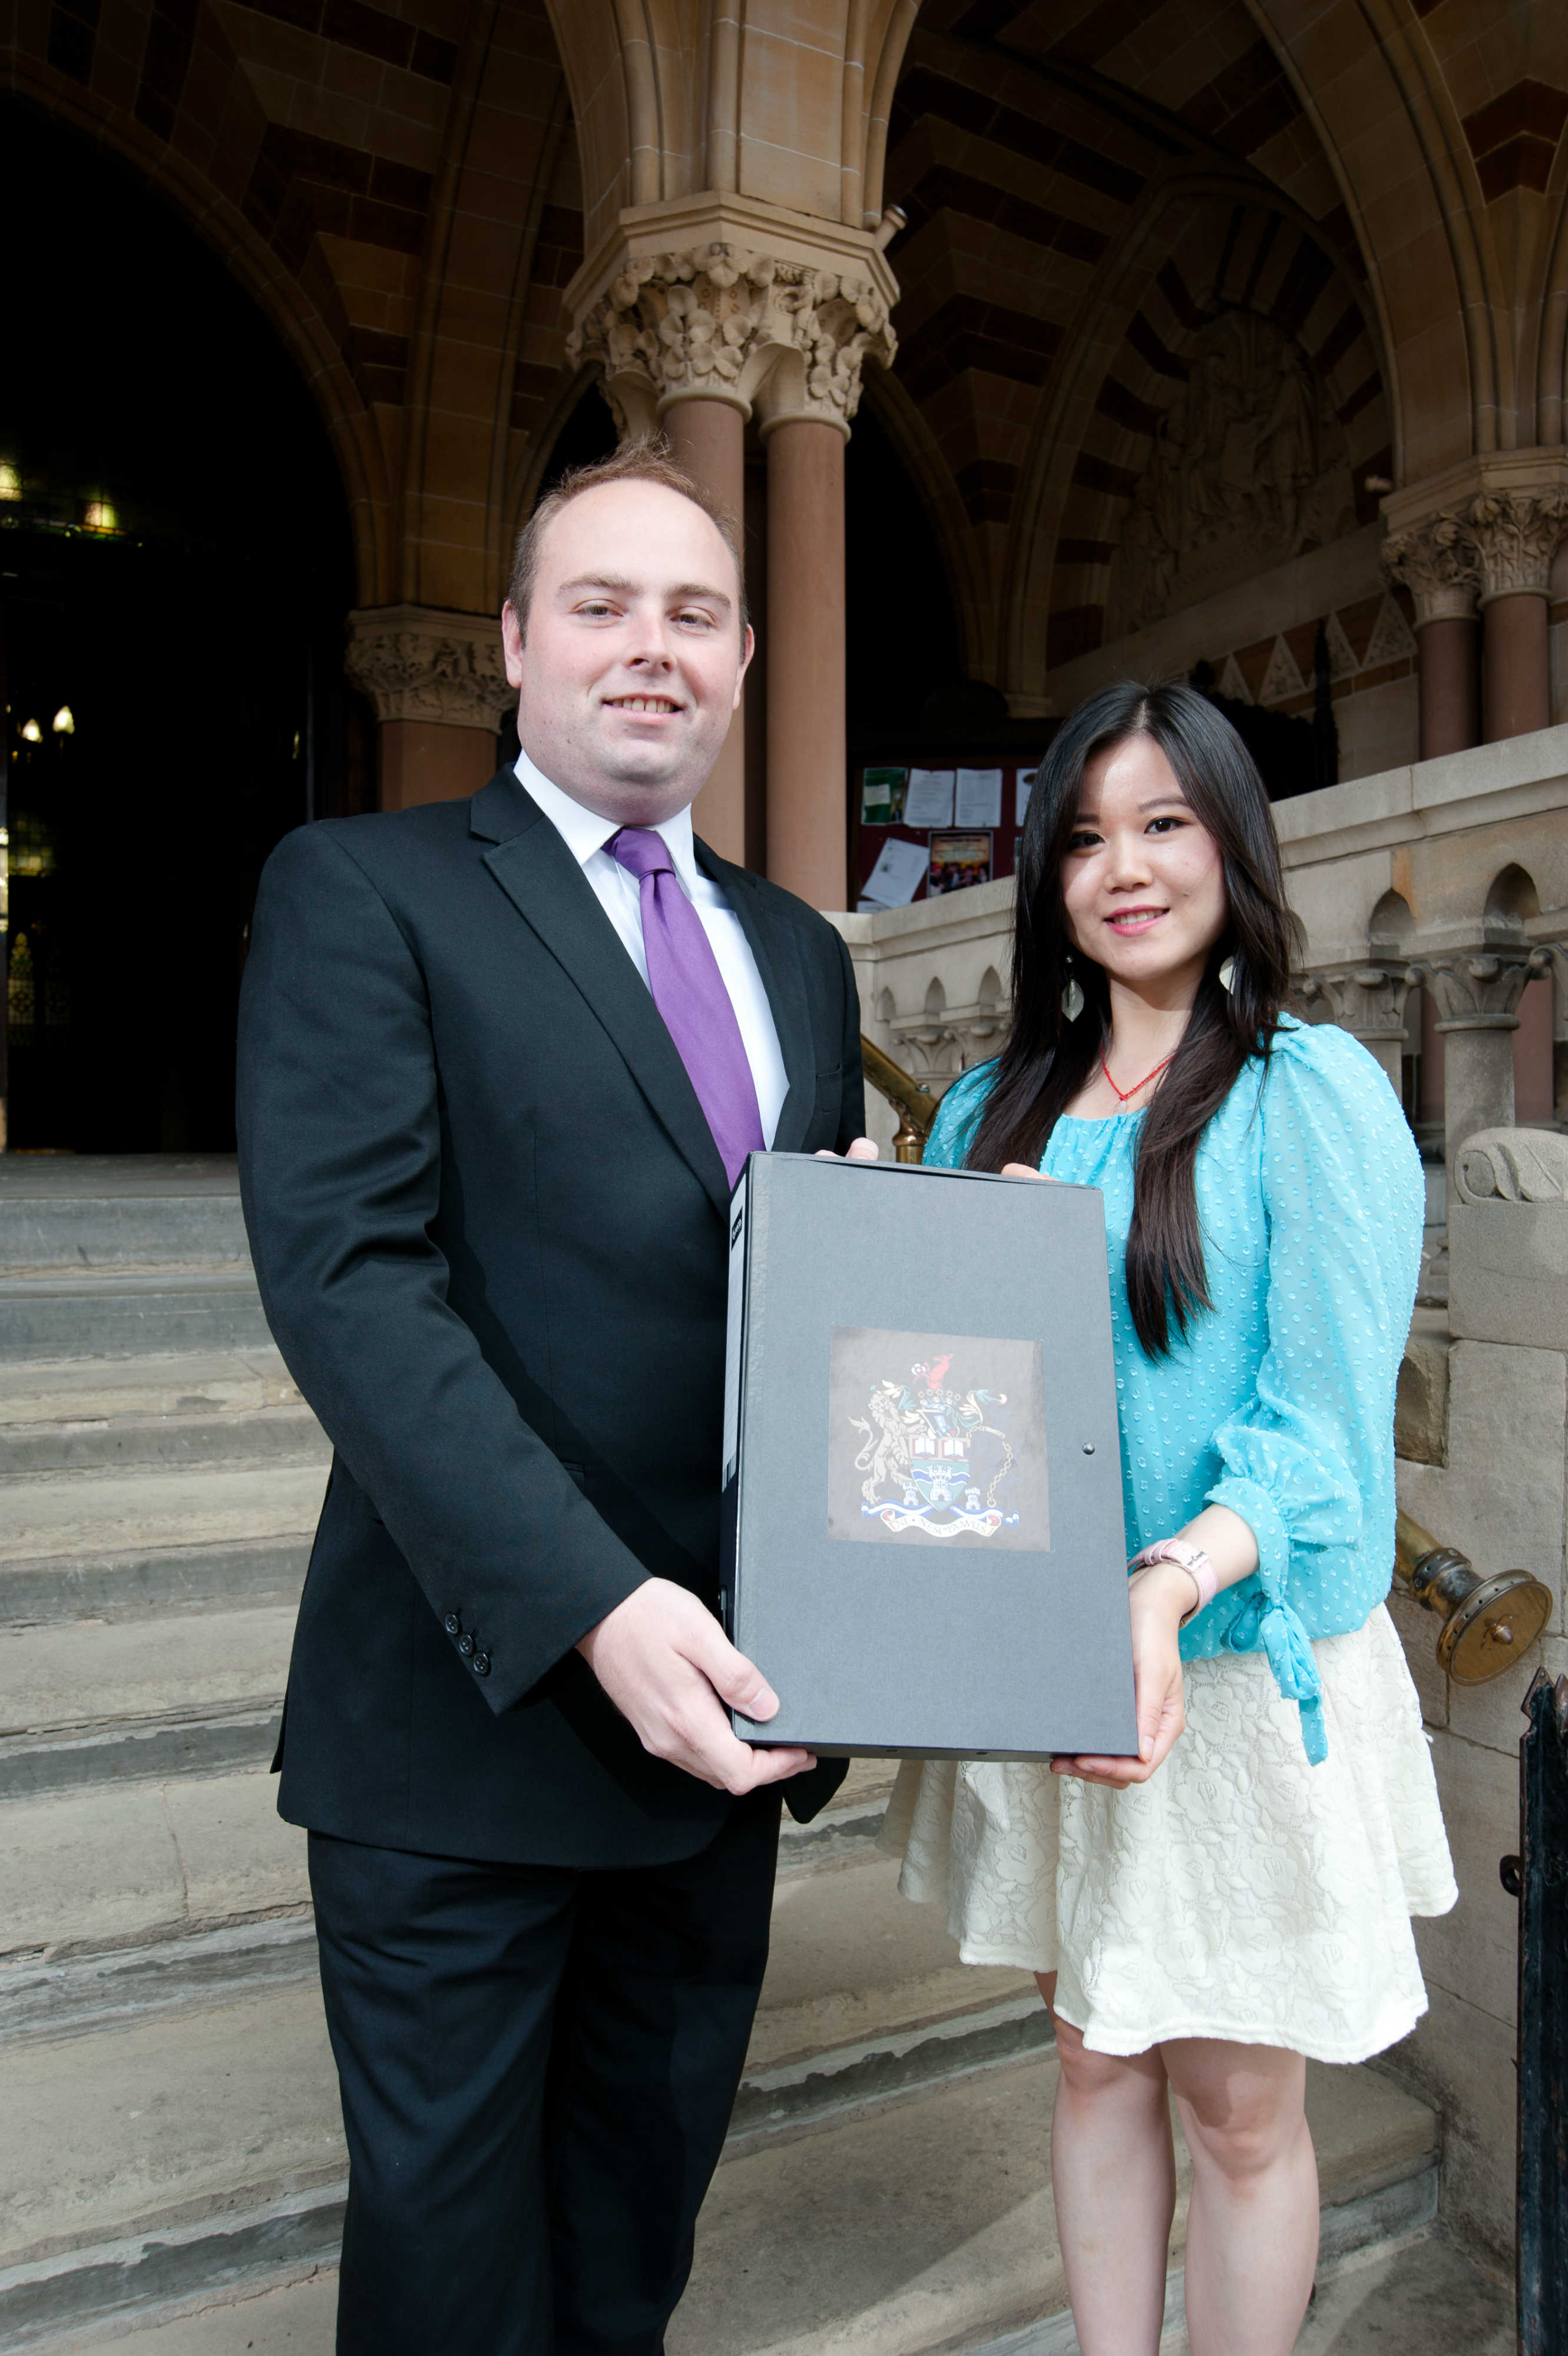 Haviour Chen, President of SU and Councillor David Mackintosh with approved Waterside plans